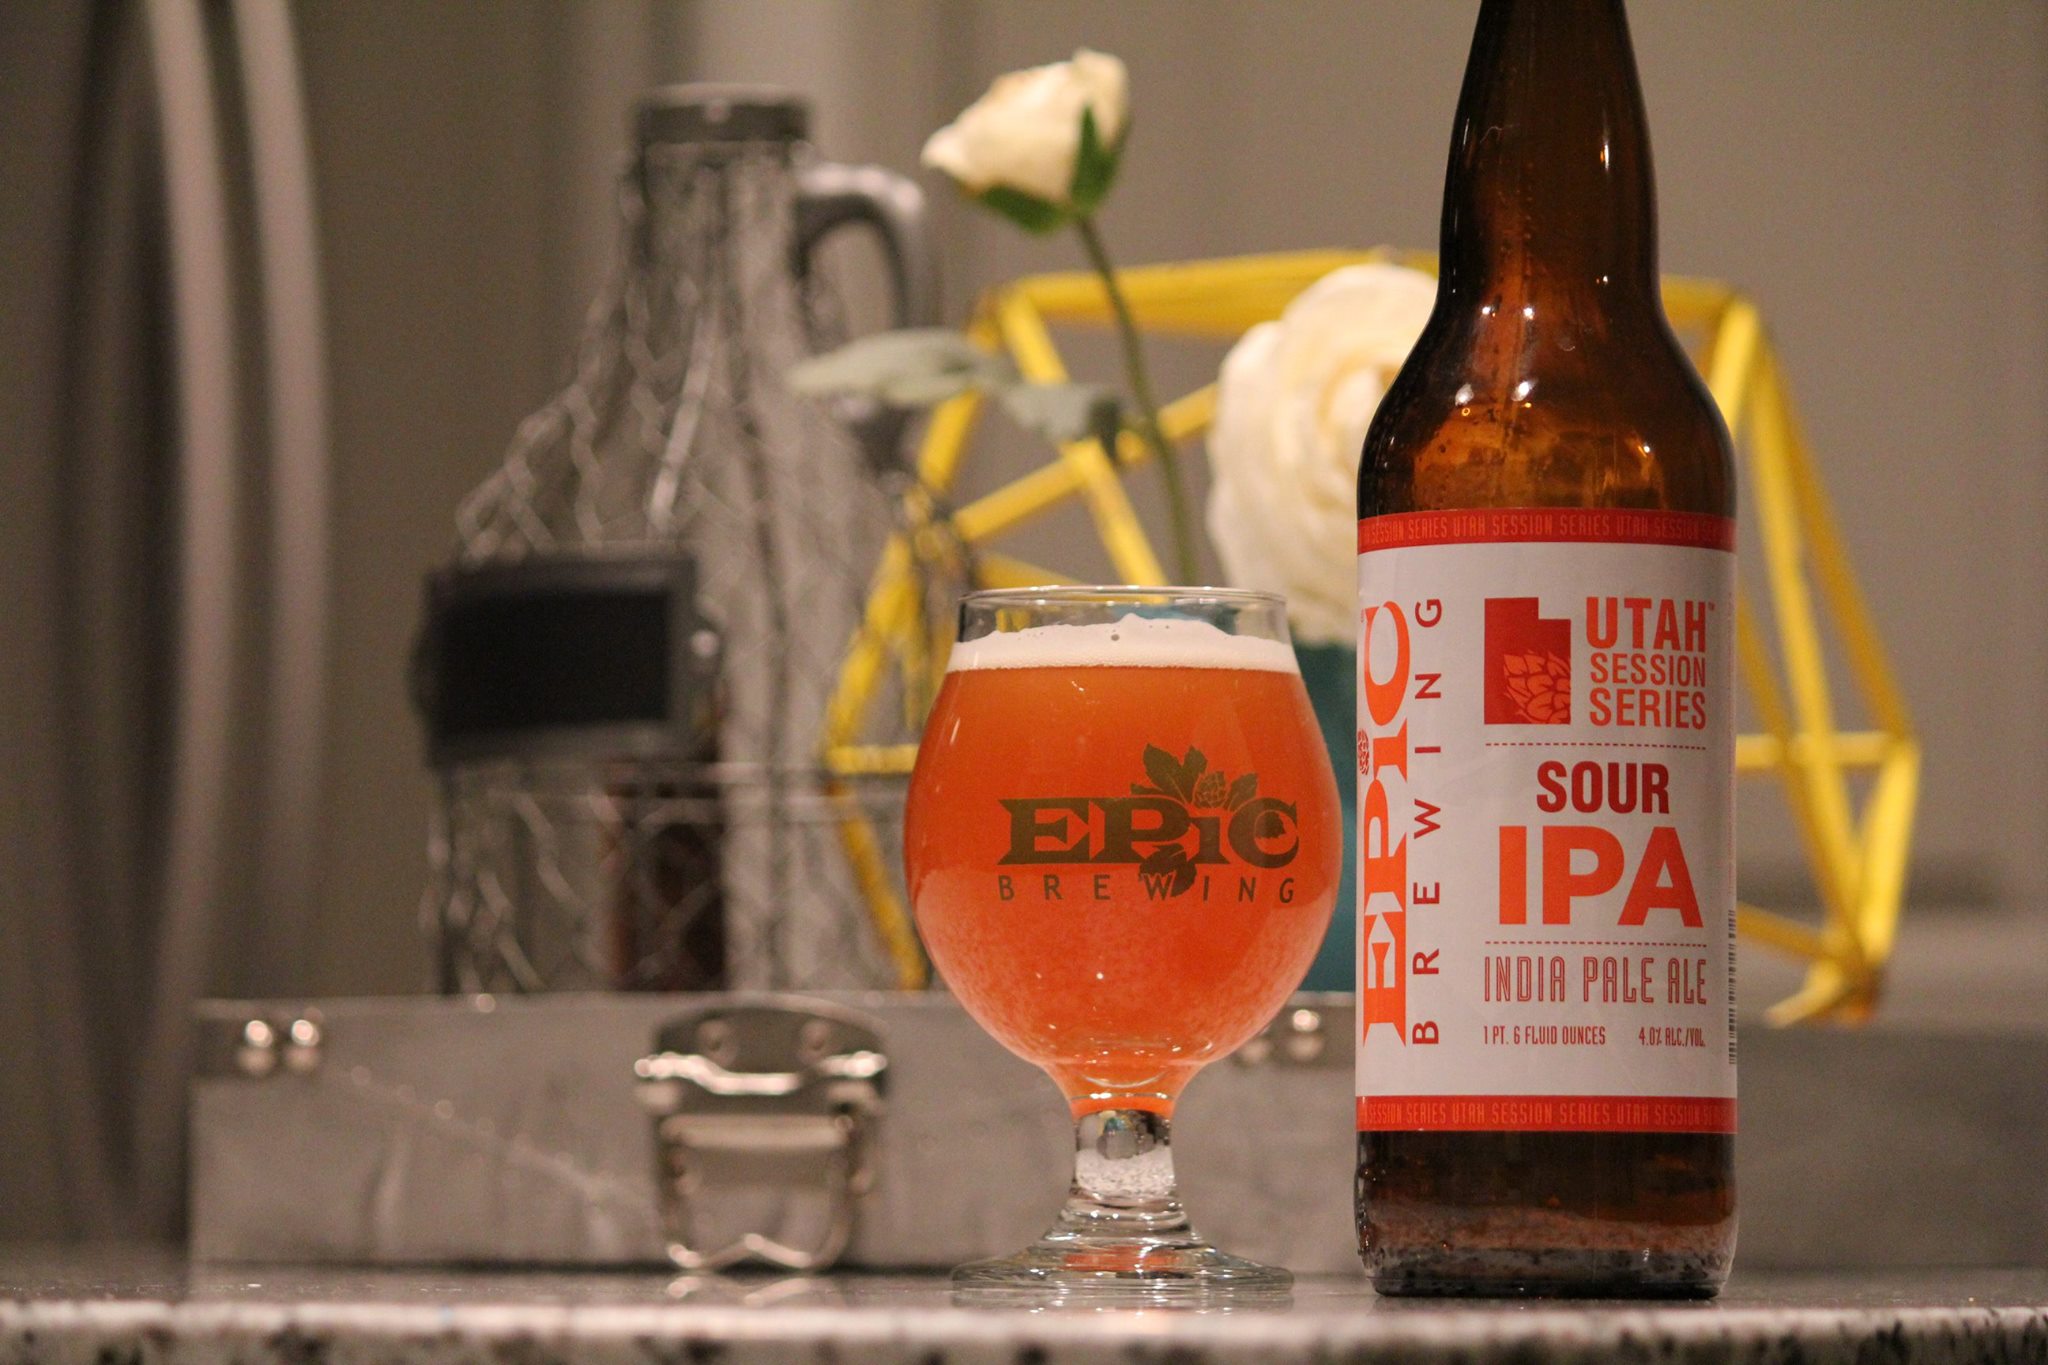 Epic Brewing Company | Sour IPA Utah Session Series